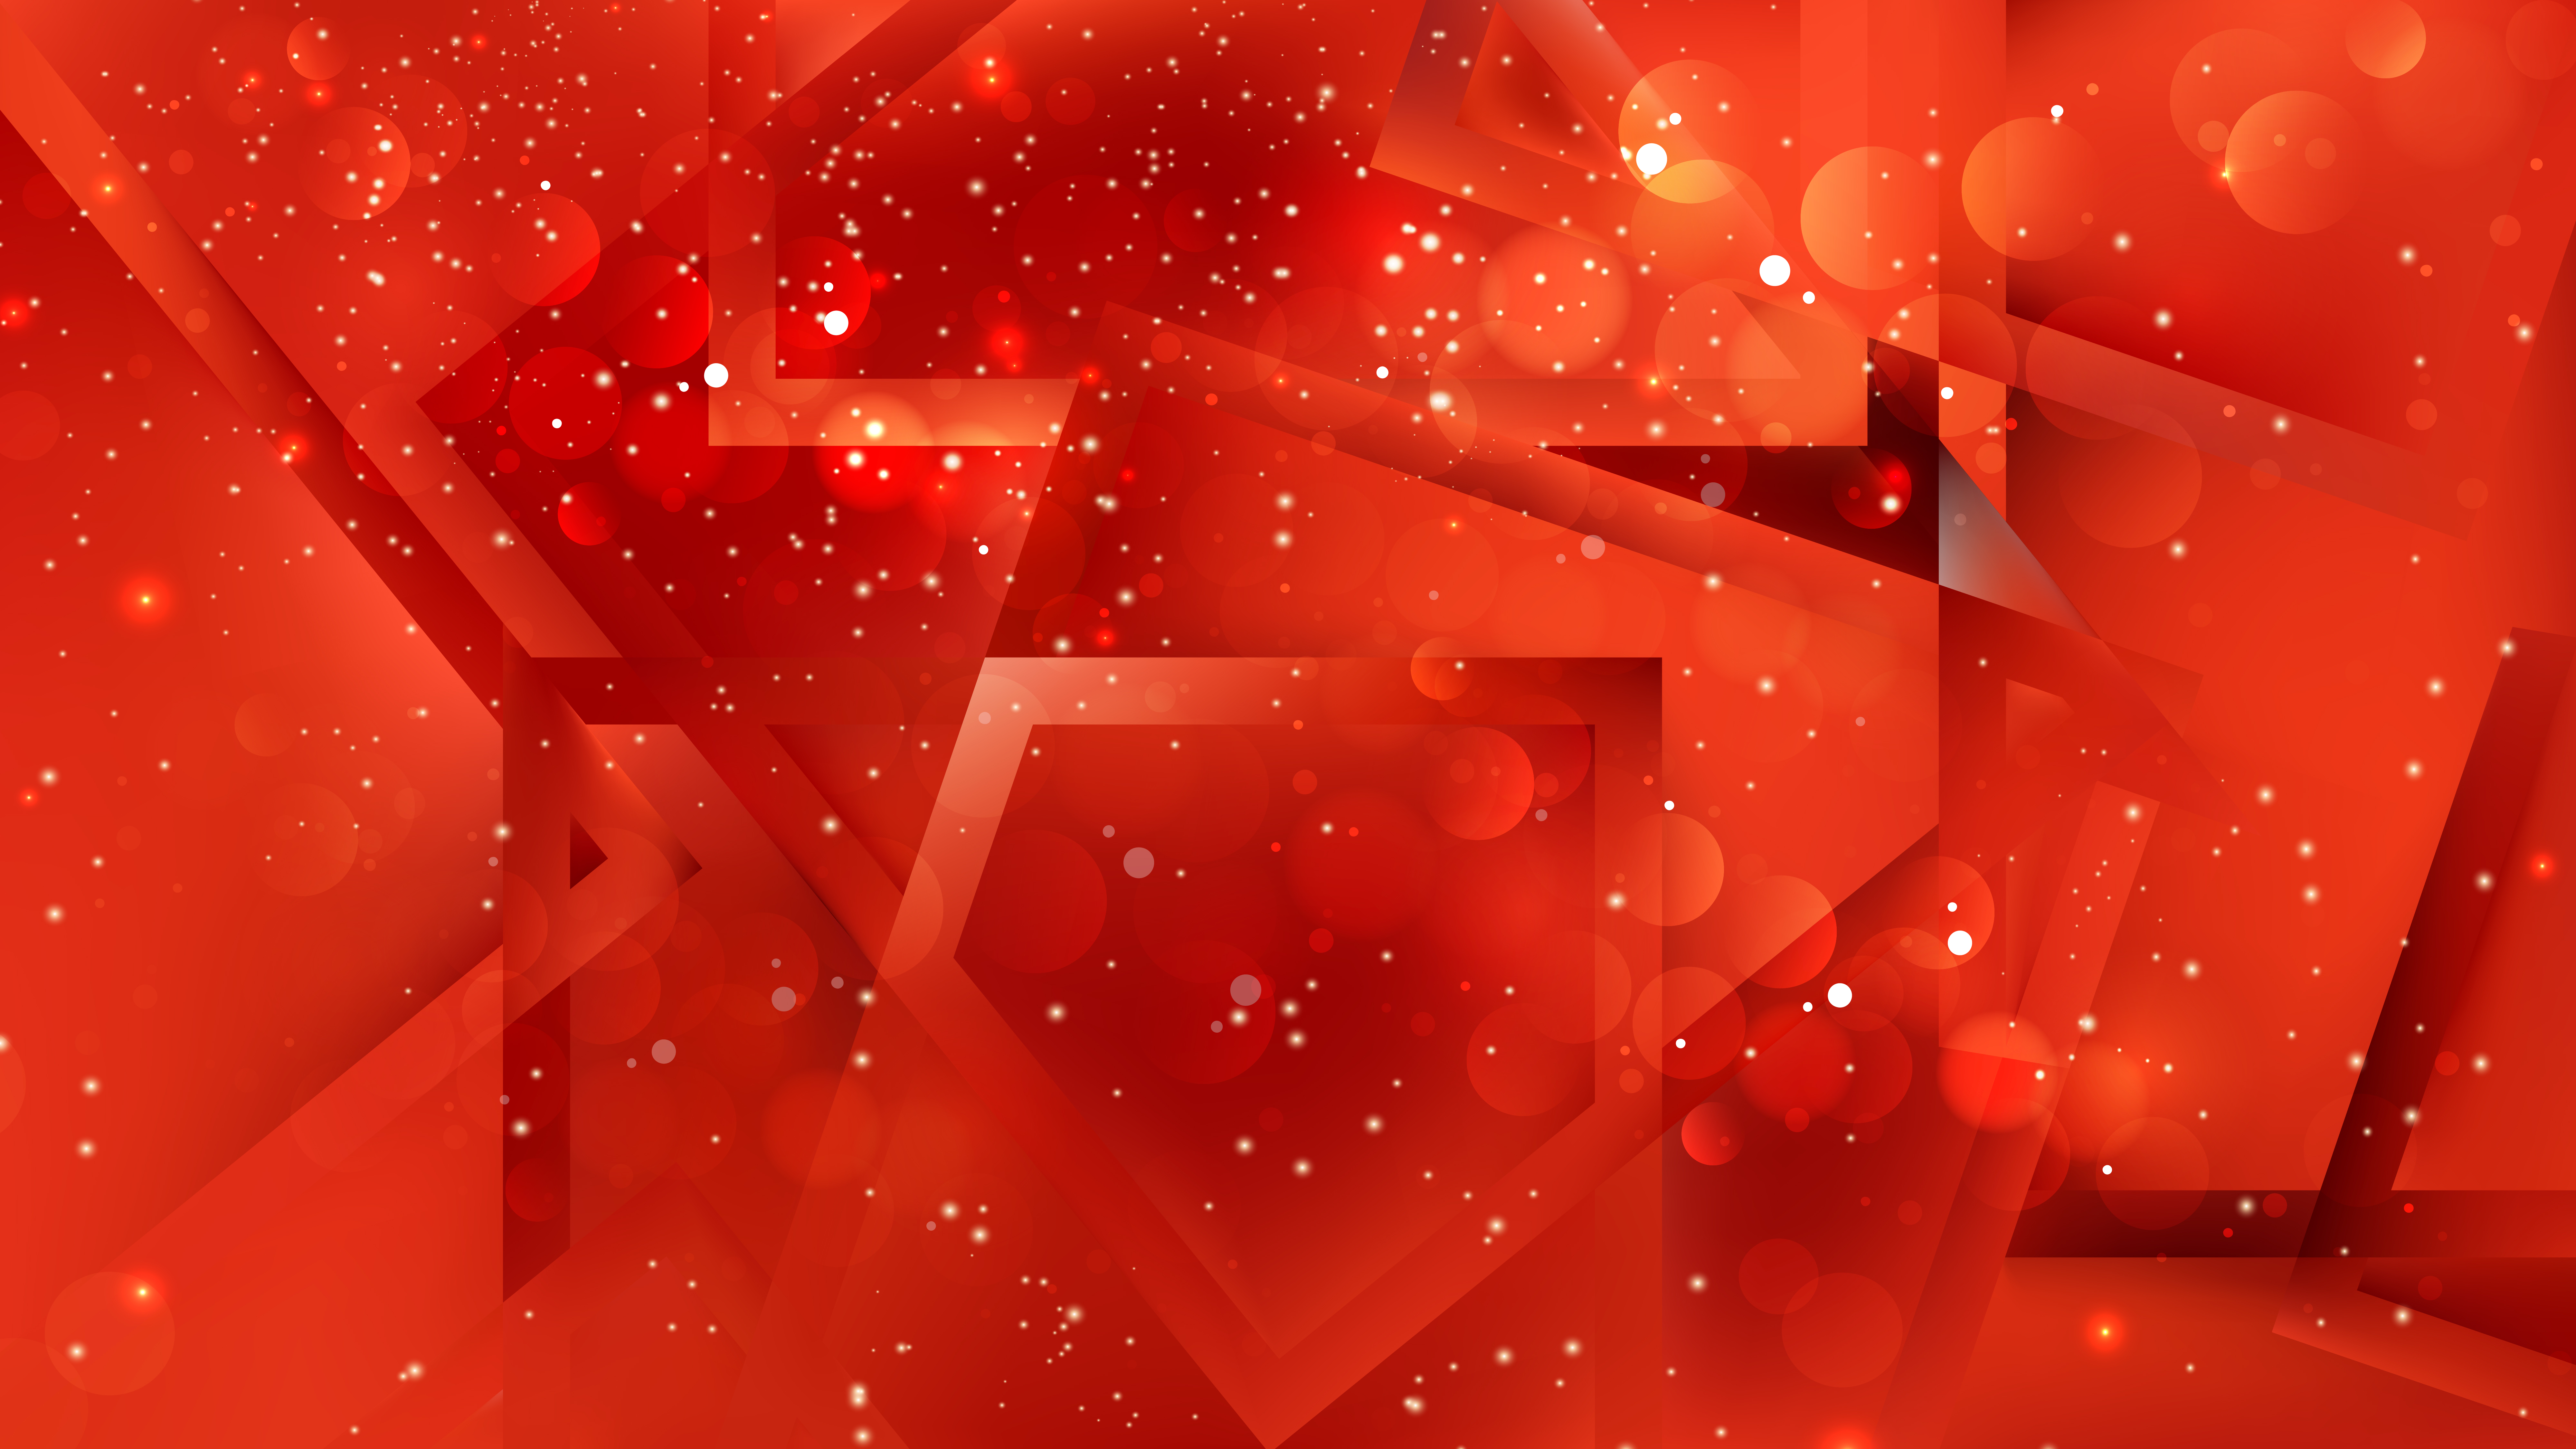 Abstract Red Background Image